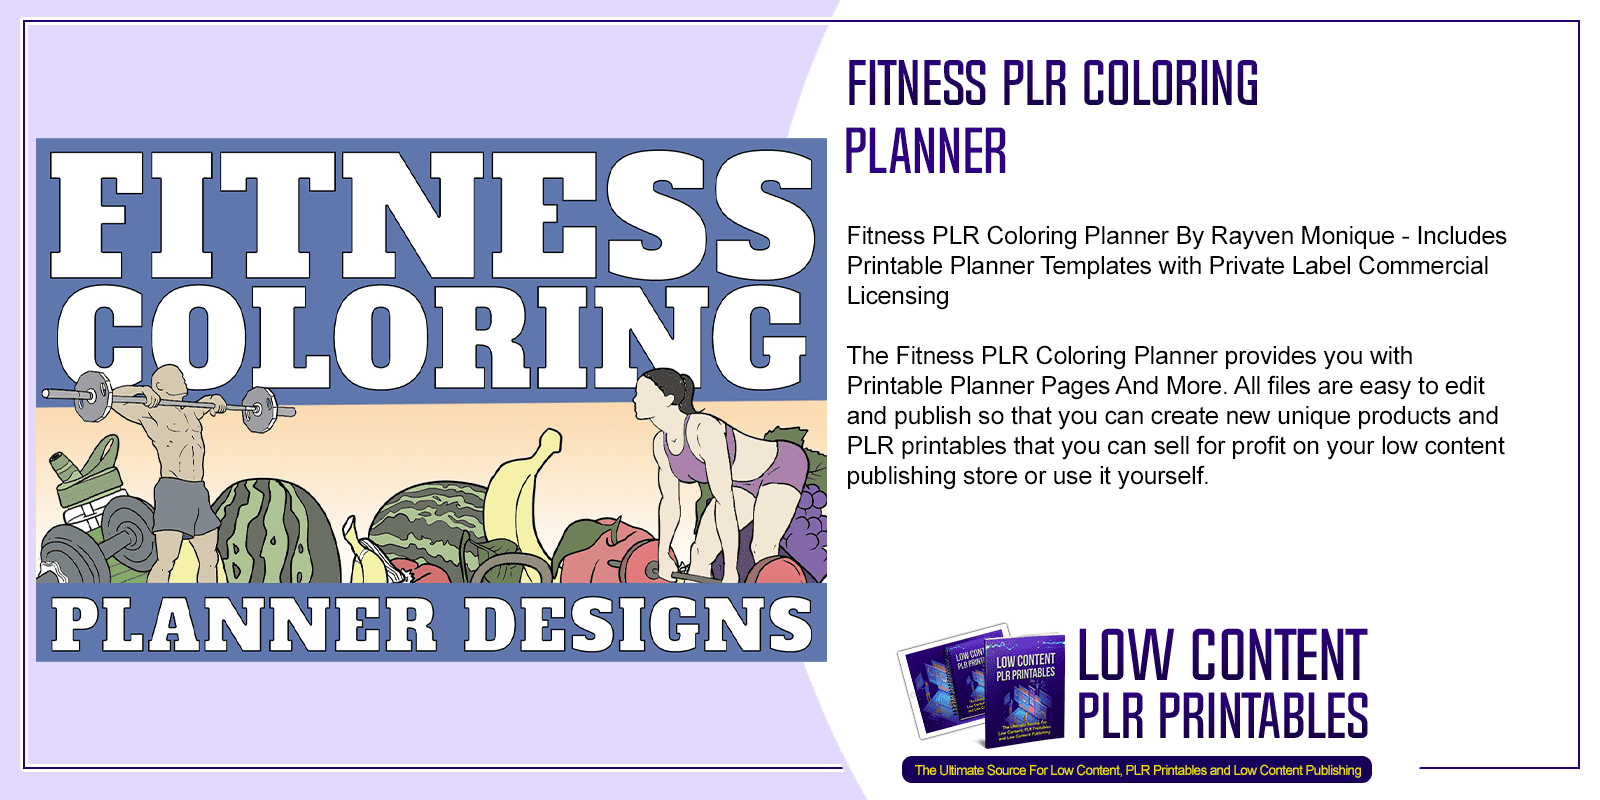 Fitness PLR Coloring Planner